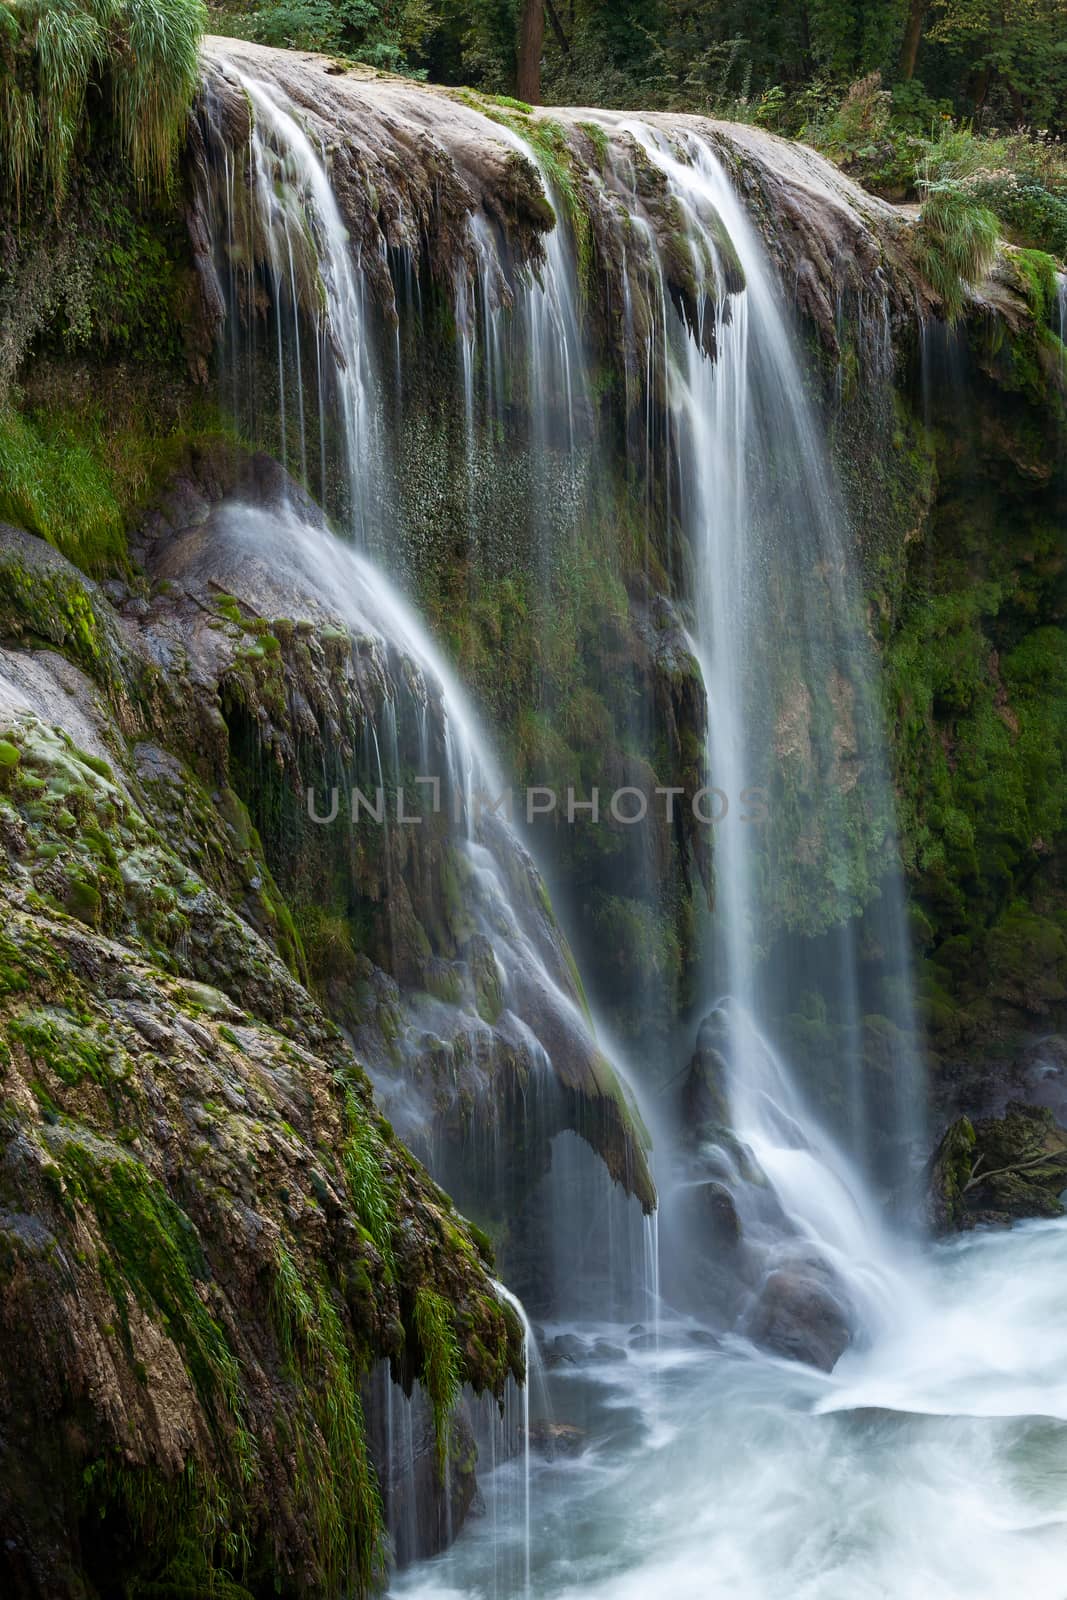 Detail of Marmore waterfall in Umbria, Italy